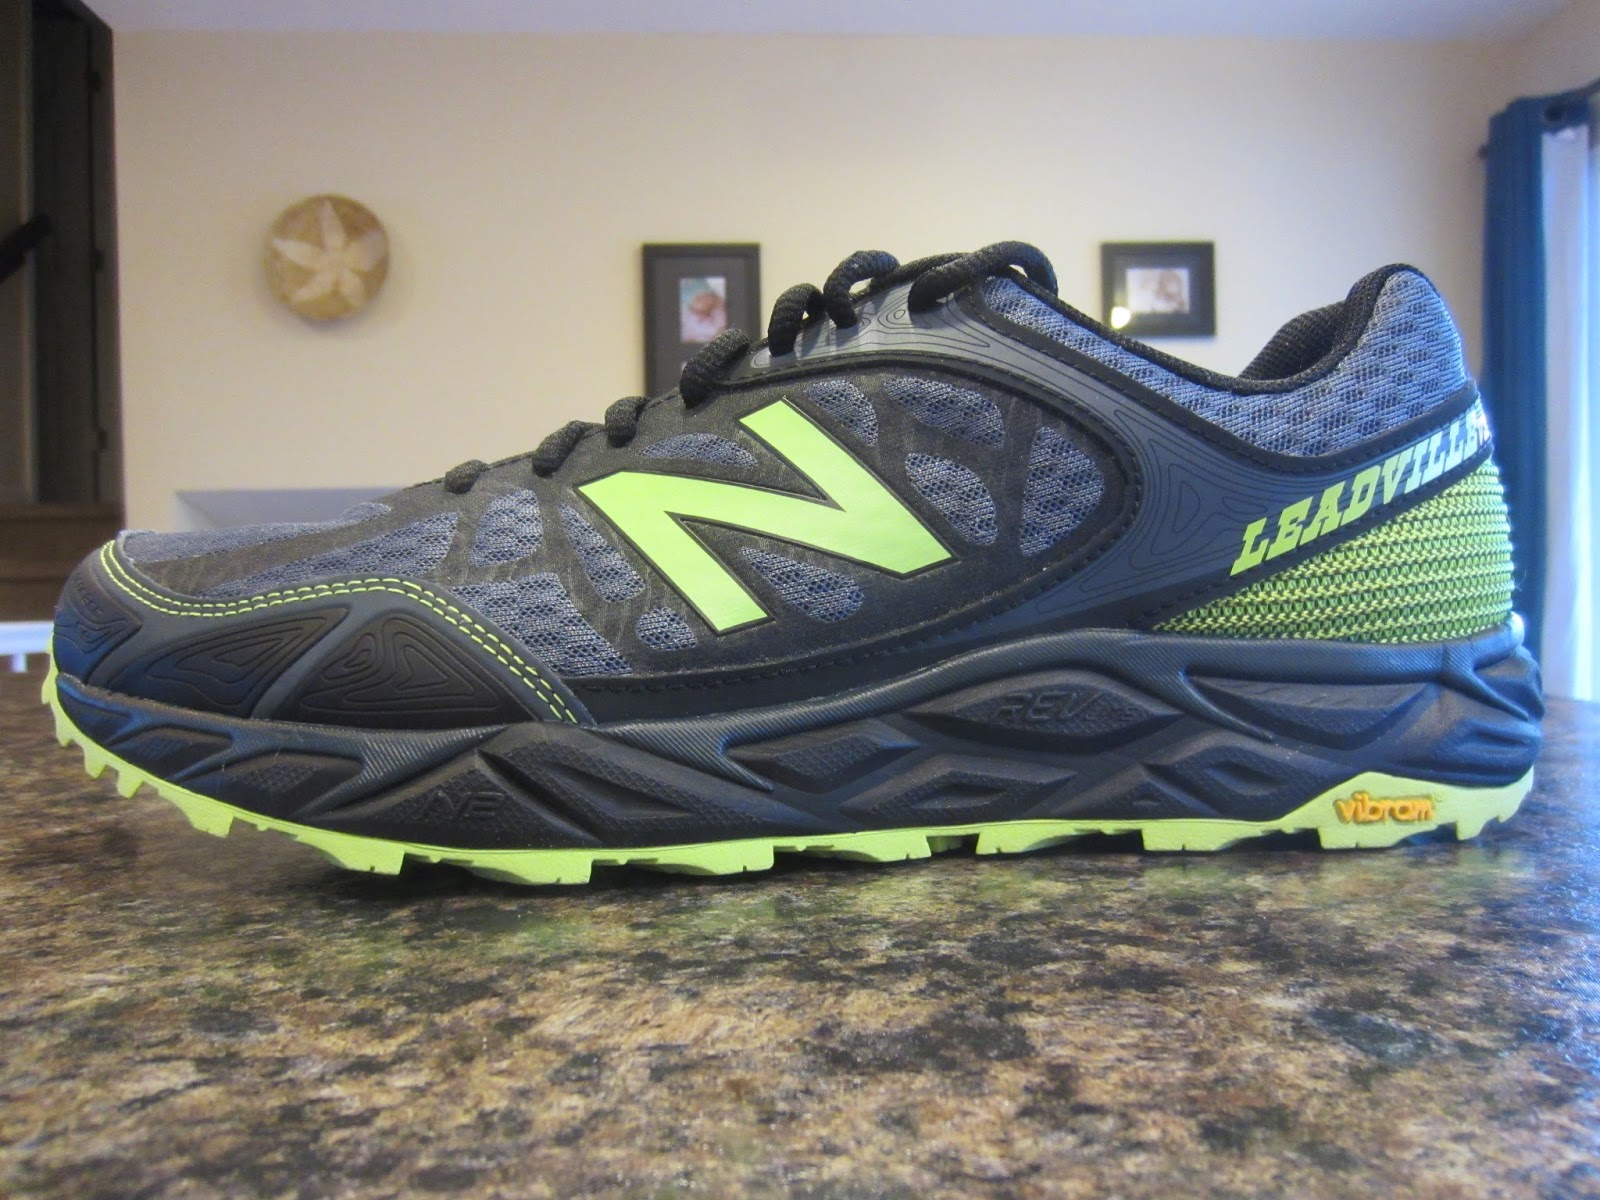 Trail Run: New Leadville v3 Accommodating Cushion and Comfort for Ultra Distance